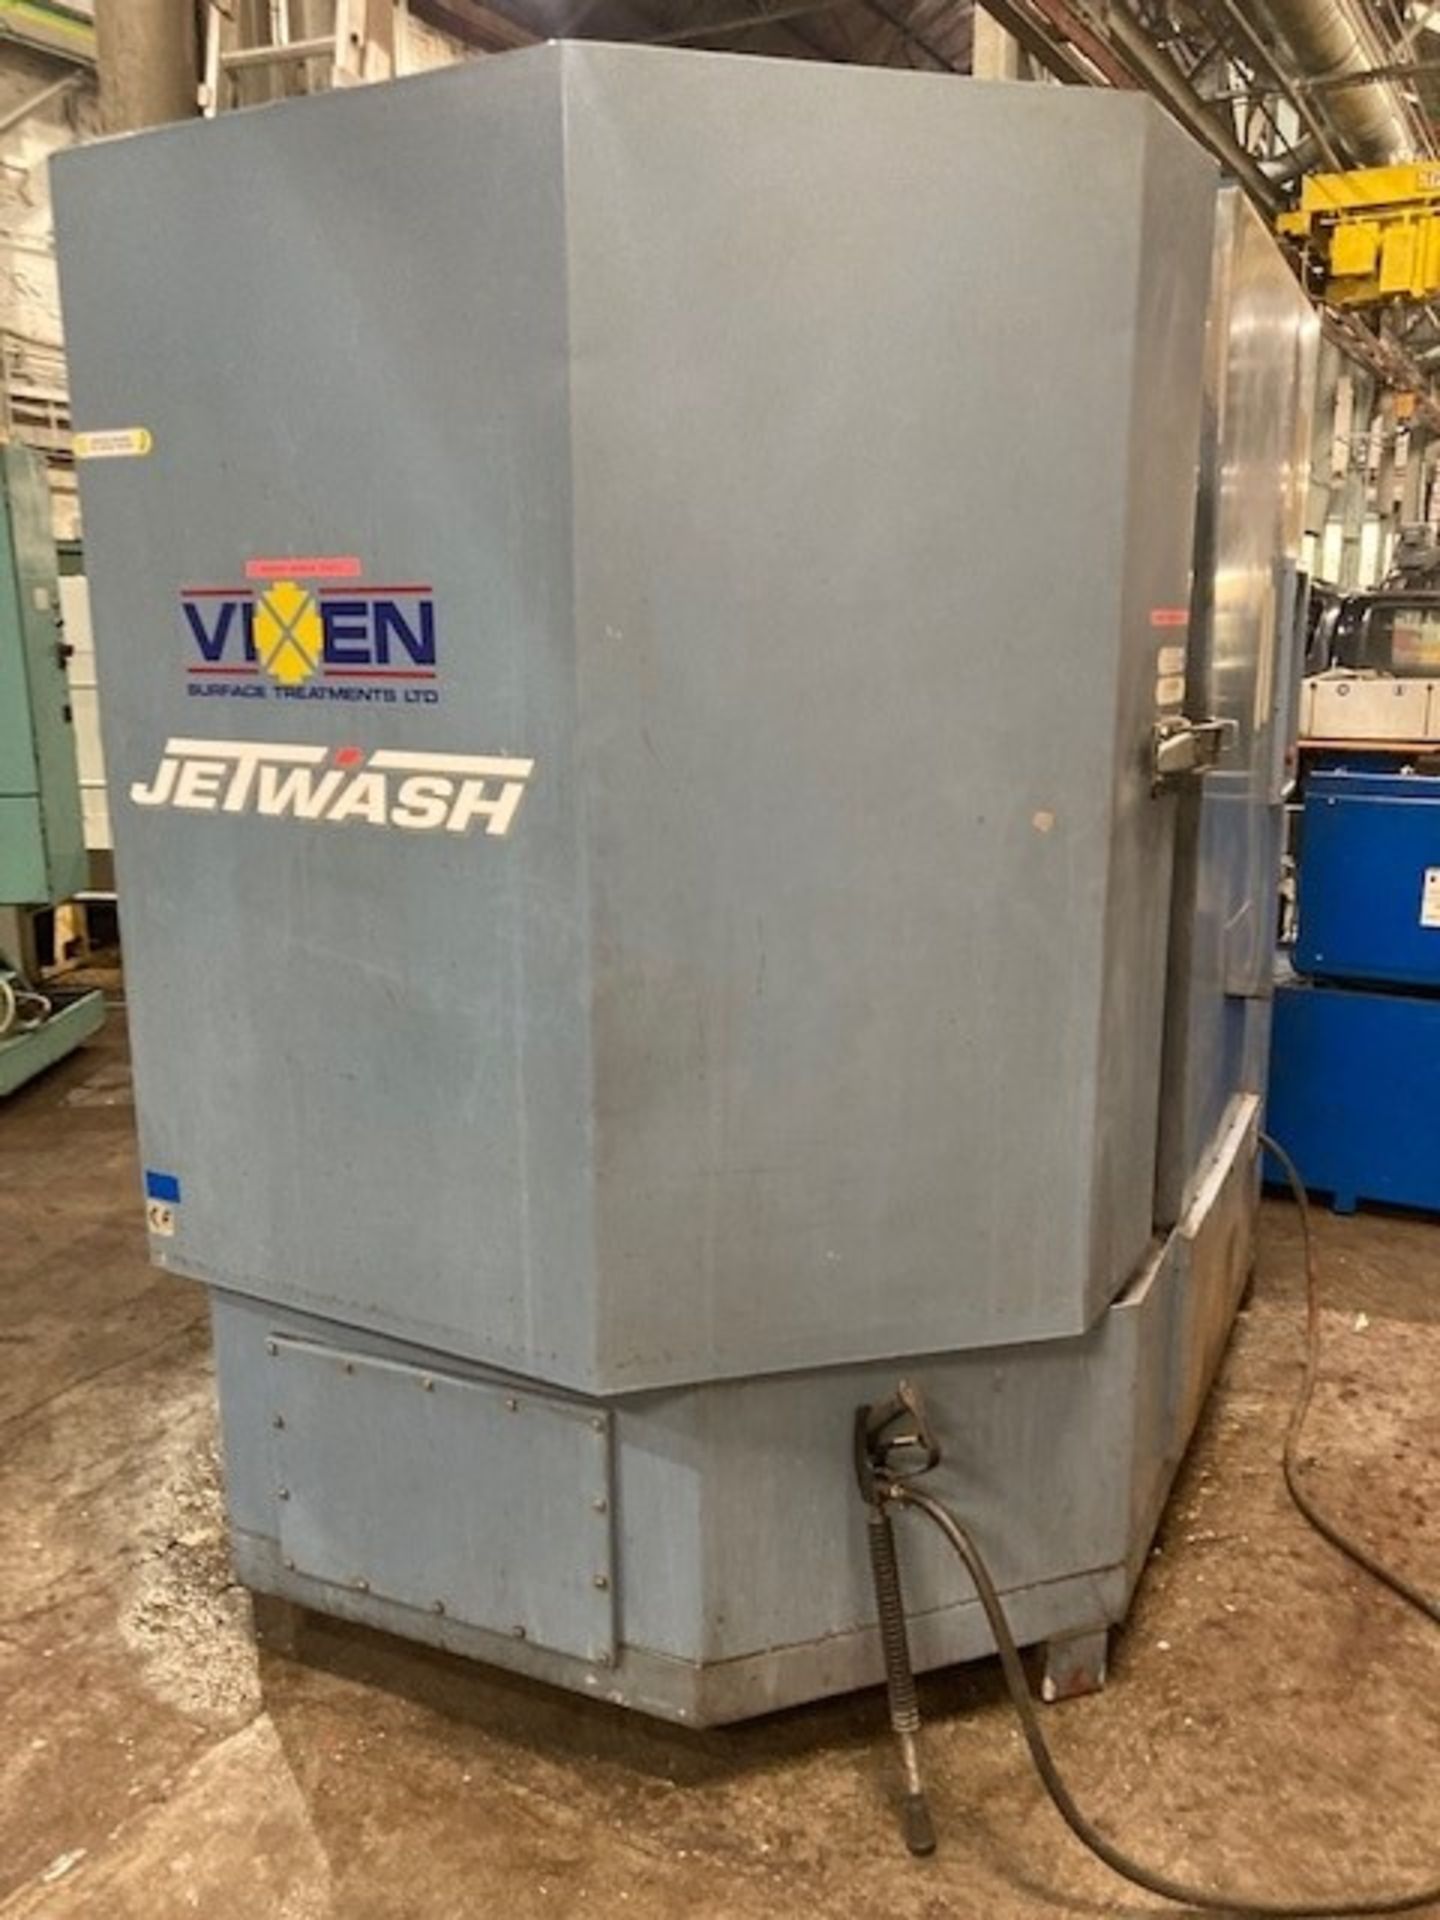 Vixen CL-1500 Large Component washing and degreasing Jetwash Carousel - Image 5 of 10